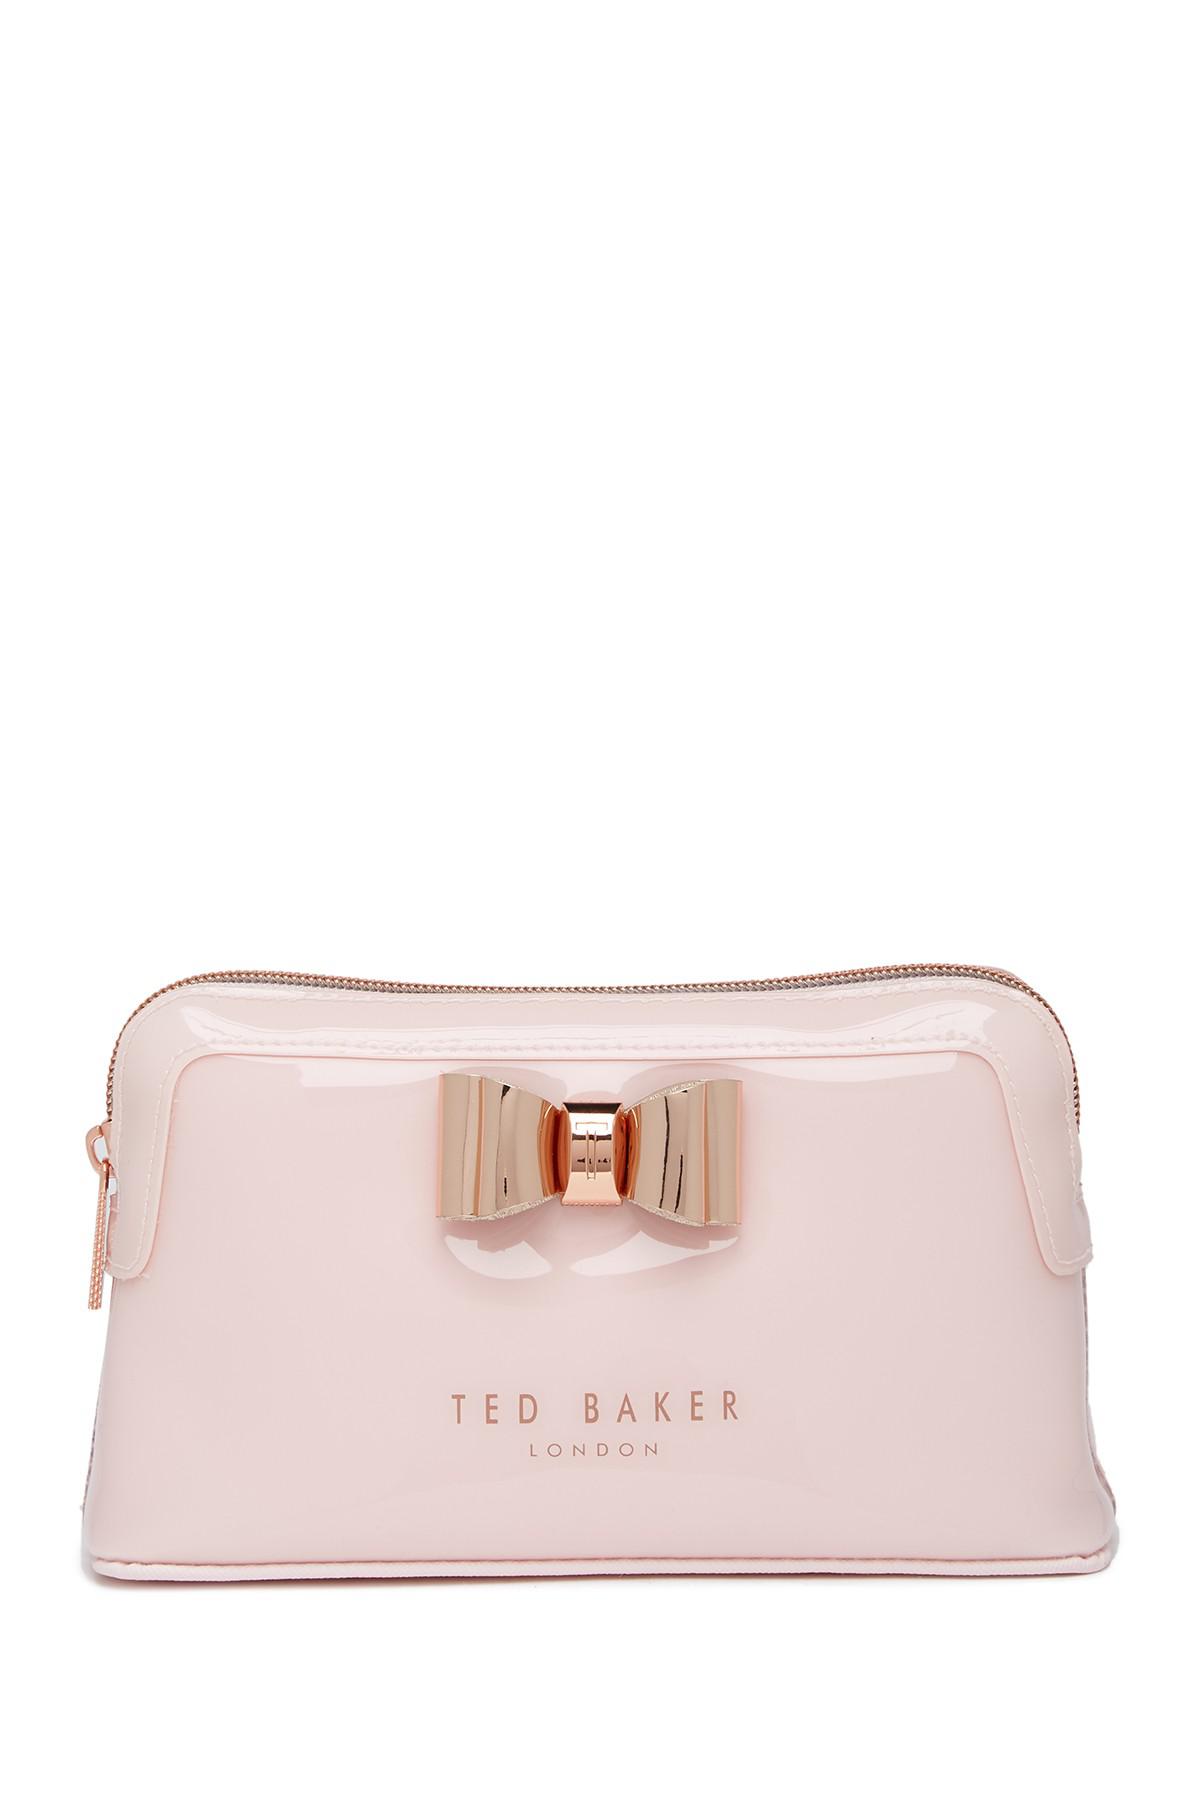 Ted Baker Synthetic Melynda Metallic Bow Make-up Bag in Pale Pink (Pink ...